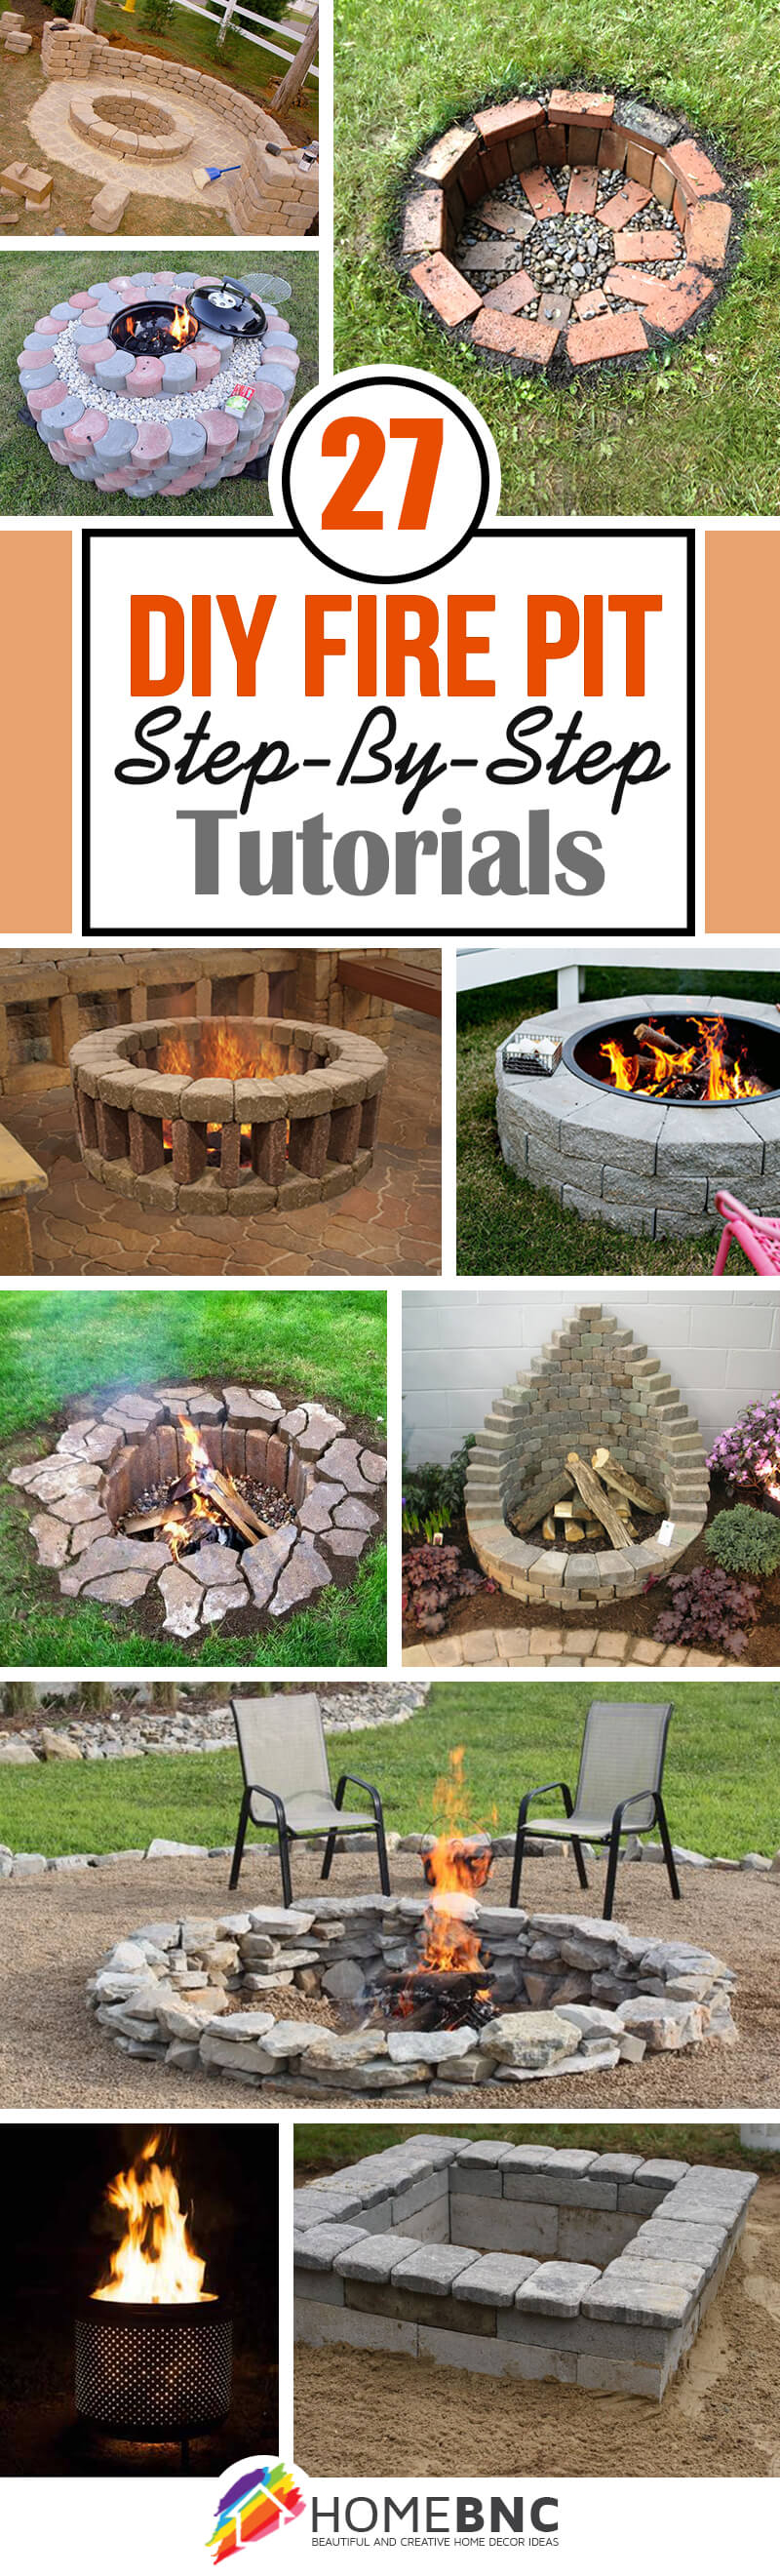 27 Best Diy Firepit Ideas And Designs, Build An Inexpensive Fire Pit